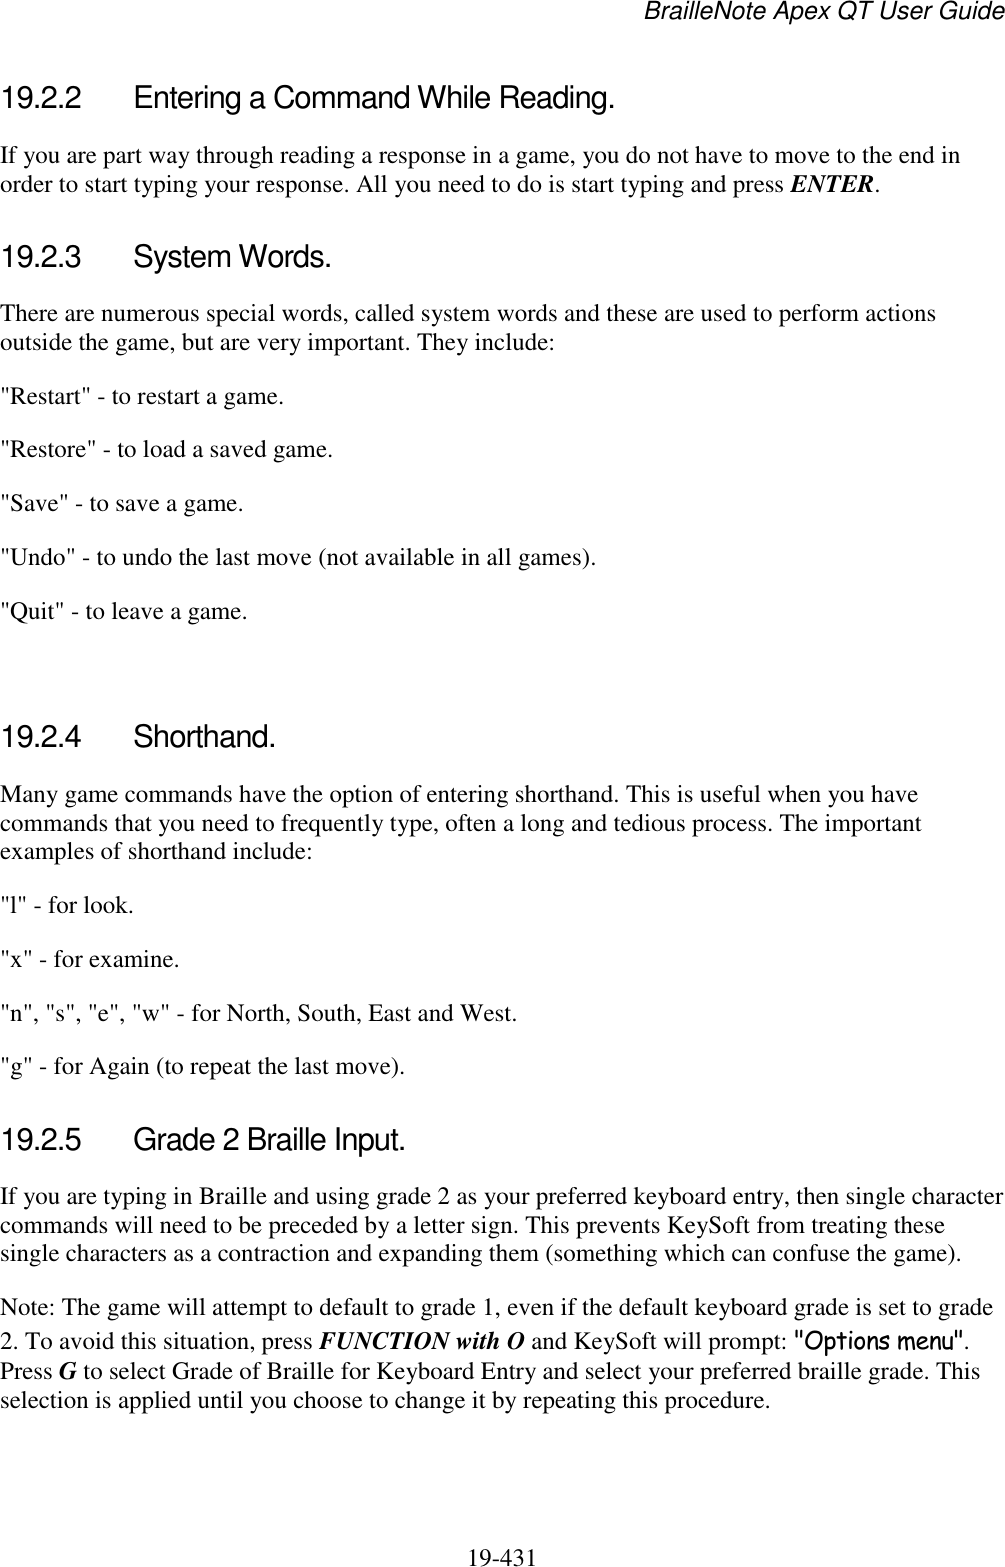 BrailleNote Apex QT User Guide  19-431   19.2.2  Entering a Command While Reading. If you are part way through reading a response in a game, you do not have to move to the end in order to start typing your response. All you need to do is start typing and press ENTER.  19.2.3  System Words. There are numerous special words, called system words and these are used to perform actions outside the game, but are very important. They include: &quot;Restart&quot; - to restart a game. &quot;Restore&quot; - to load a saved game. &quot;Save&quot; - to save a game. &quot;Undo&quot; - to undo the last move (not available in all games). &quot;Quit&quot; - to leave a game.   19.2.4  Shorthand. Many game commands have the option of entering shorthand. This is useful when you have commands that you need to frequently type, often a long and tedious process. The important examples of shorthand include: &quot;l&quot; - for look. &quot;x&quot; - for examine. &quot;n&quot;, &quot;s&quot;, &quot;e&quot;, &quot;w&quot; - for North, South, East and West. &quot;g&quot; - for Again (to repeat the last move).  19.2.5  Grade 2 Braille Input. If you are typing in Braille and using grade 2 as your preferred keyboard entry, then single character commands will need to be preceded by a letter sign. This prevents KeySoft from treating these single characters as a contraction and expanding them (something which can confuse the game). Note: The game will attempt to default to grade 1, even if the default keyboard grade is set to grade 2. To avoid this situation, press FUNCTION with O and KeySoft will prompt: &quot;Options menu&quot;. Press G to select Grade of Braille for Keyboard Entry and select your preferred braille grade. This selection is applied until you choose to change it by repeating this procedure.   